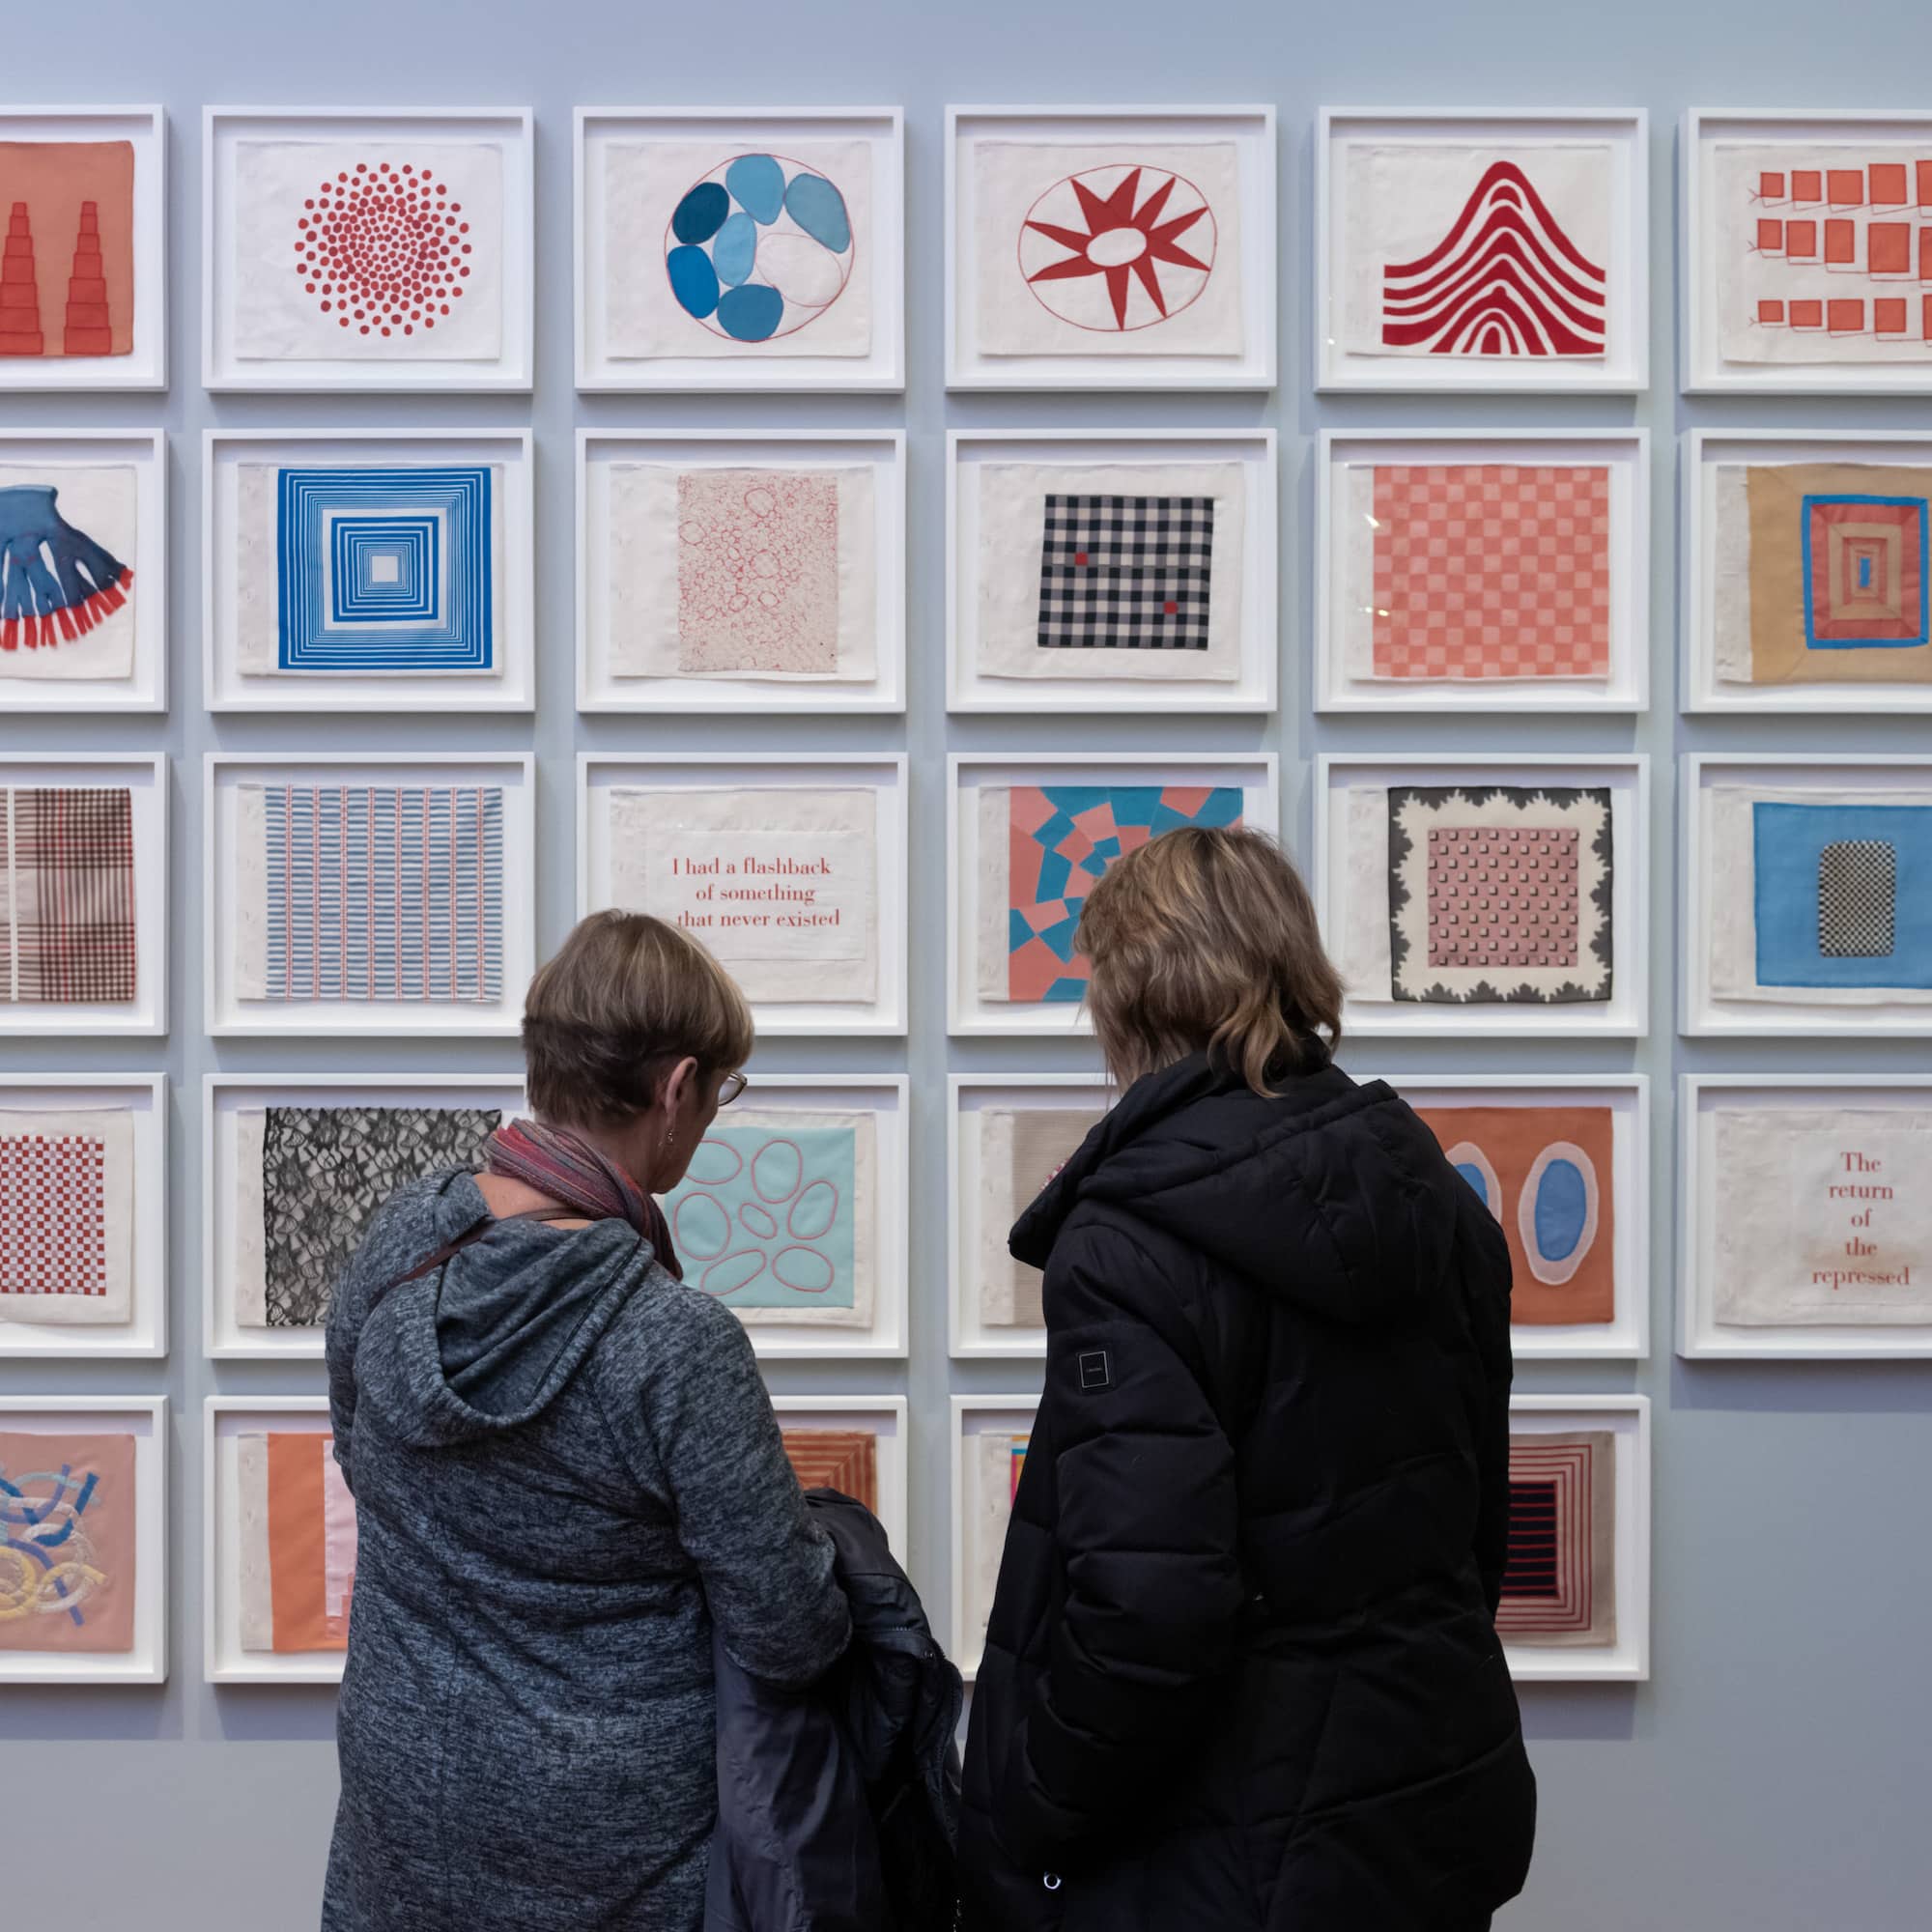 Two people, dressed in casual attire, are standing close to a wall, examining artwork consisting of multiple square frames, each containing different artistic patterns or designs, including abstract patterns, and varied color schemes.